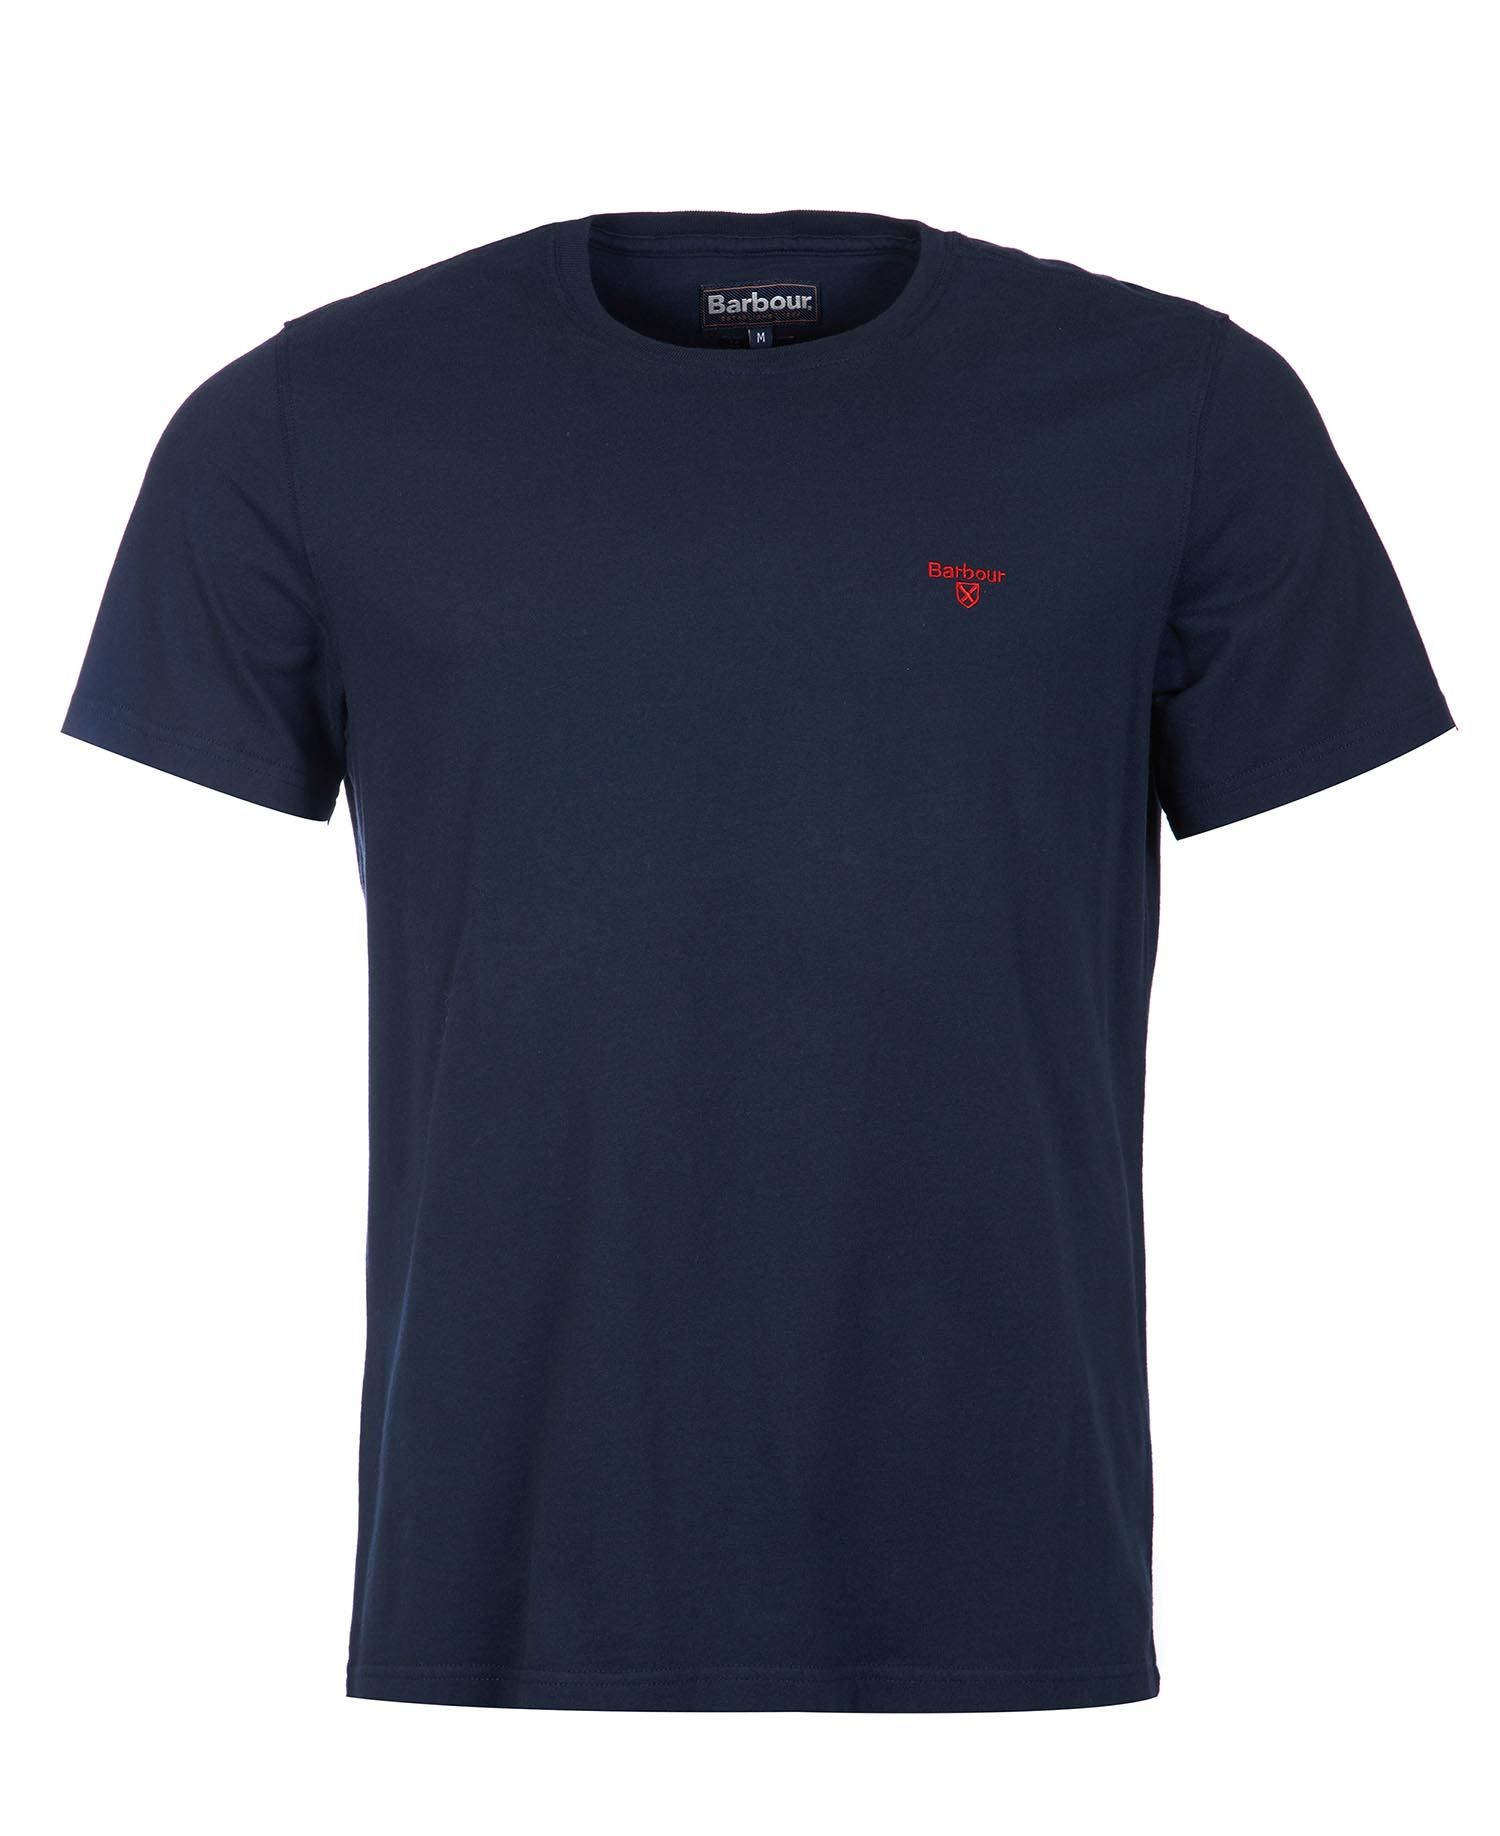 Barbour Barbour Sports T-shirt Navy